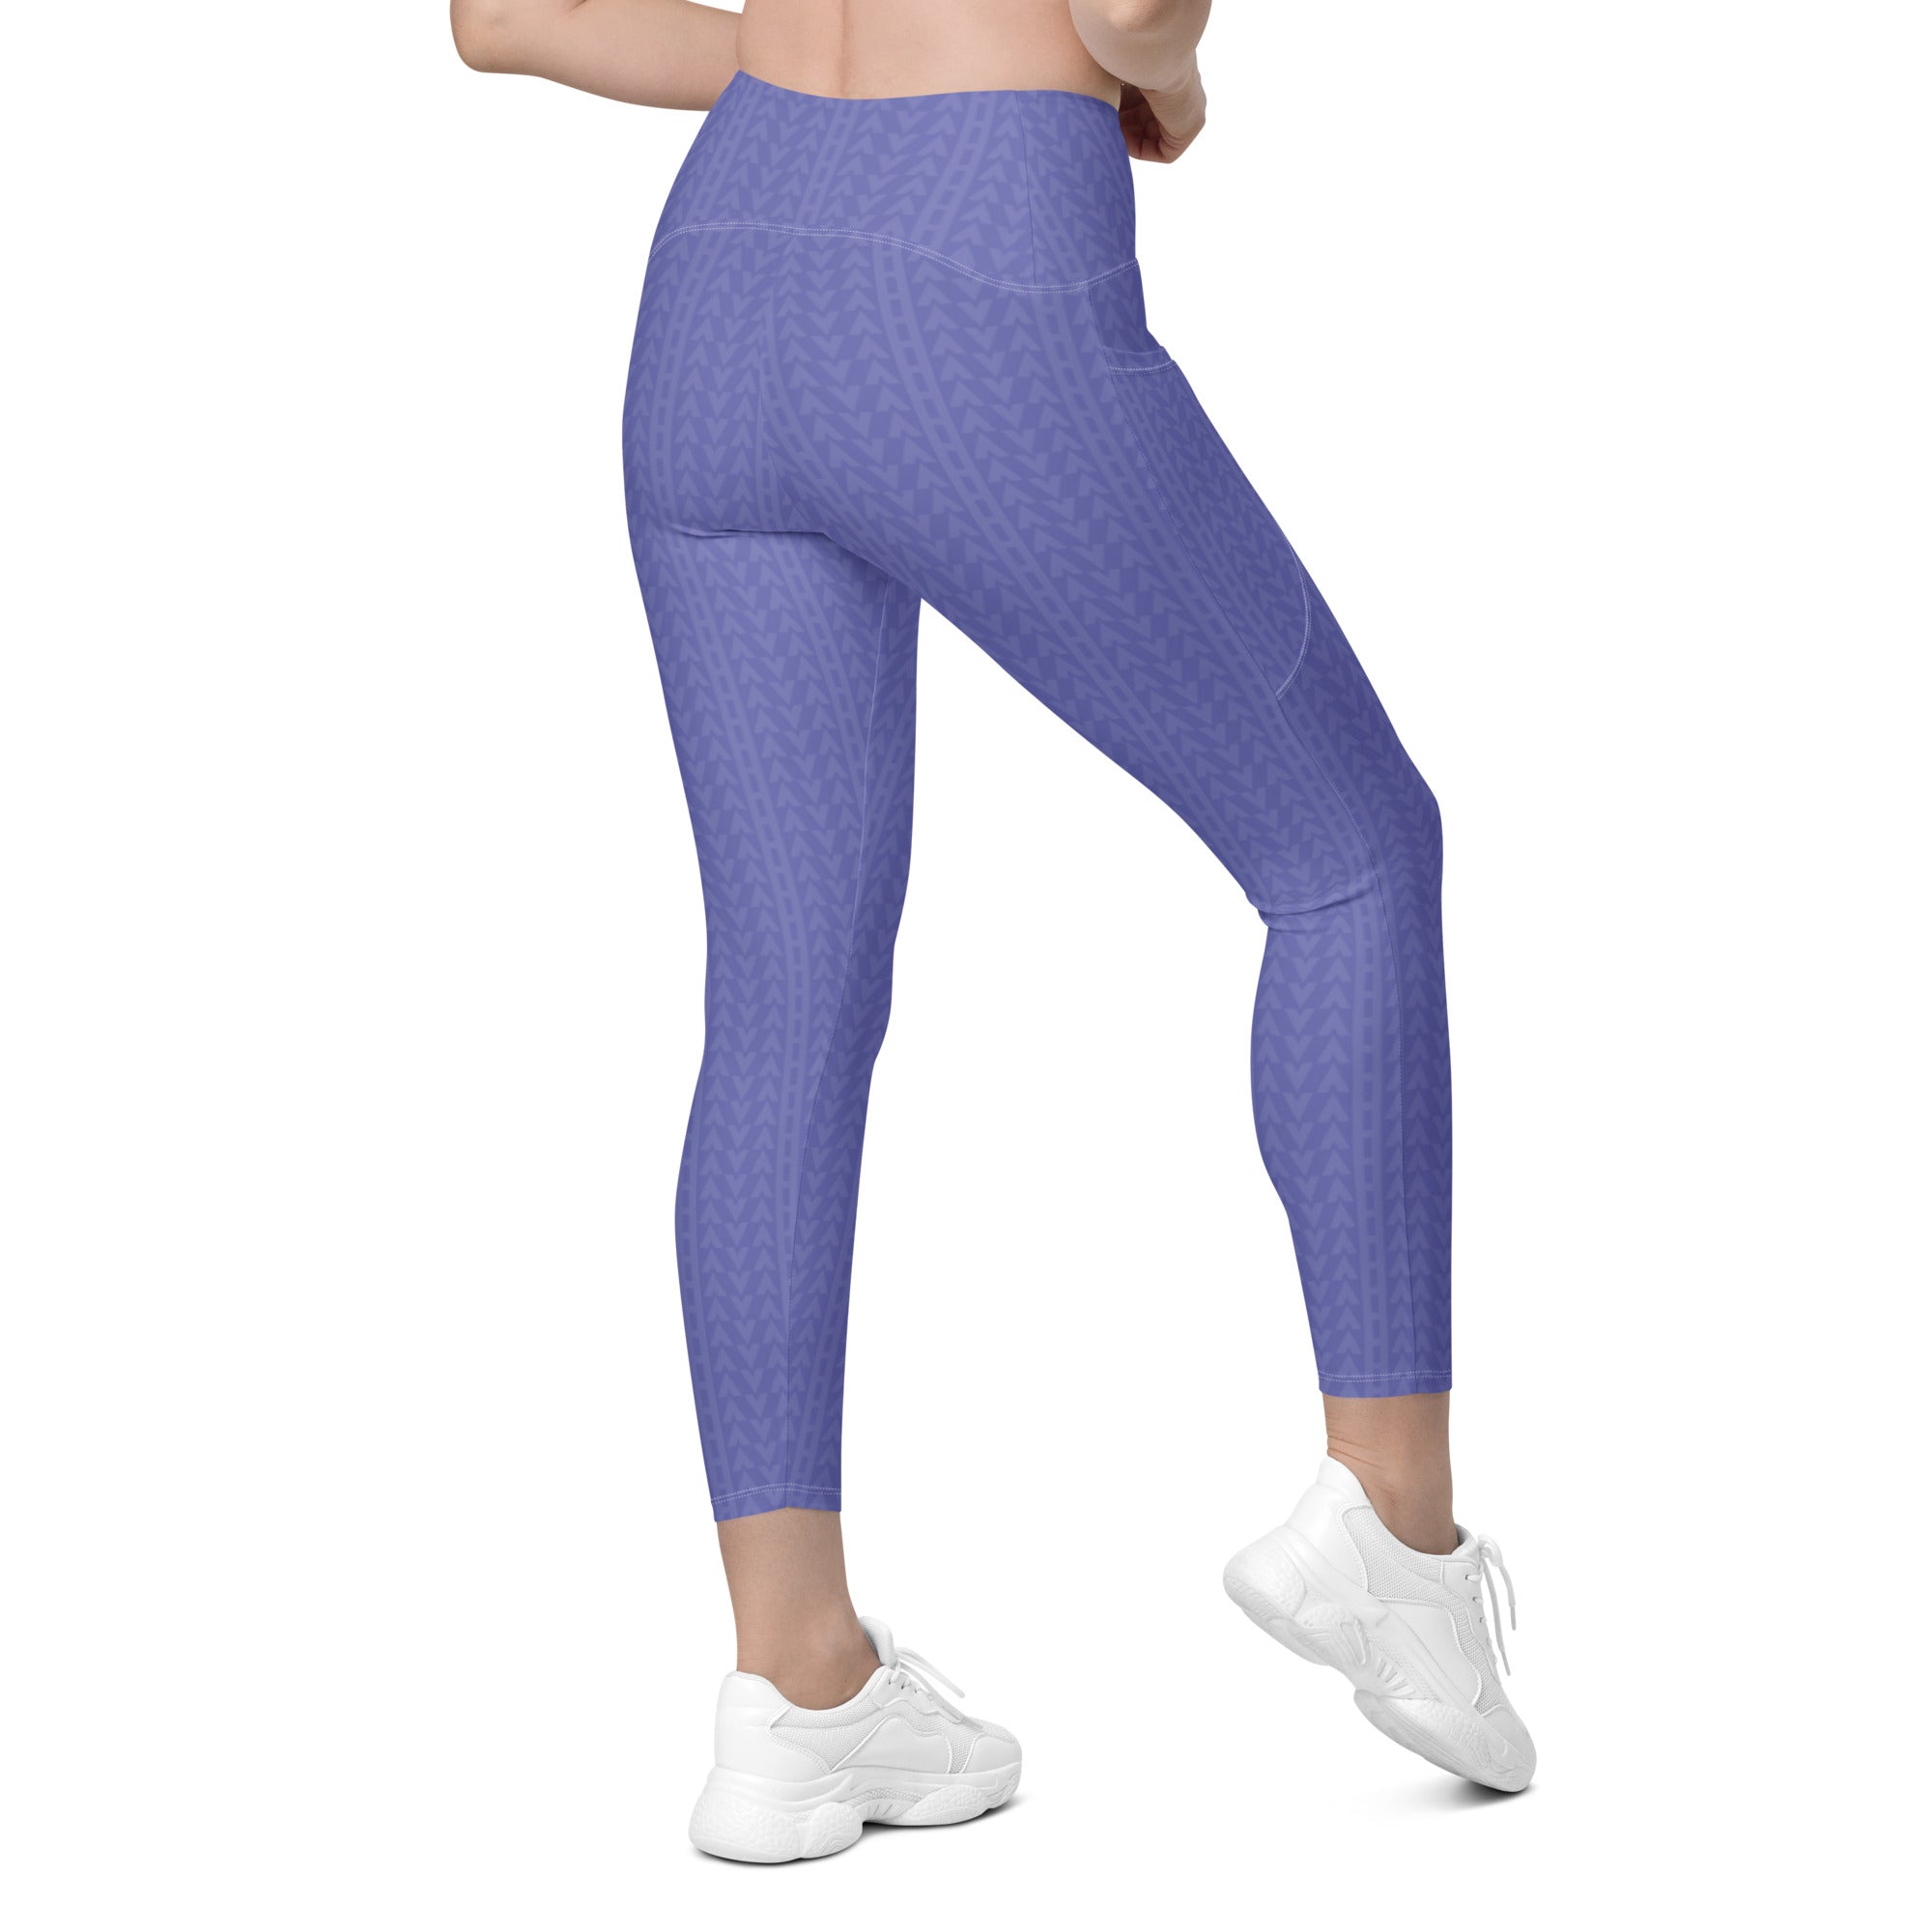 Lavender Bloom High Waisted Leggings with Pockets